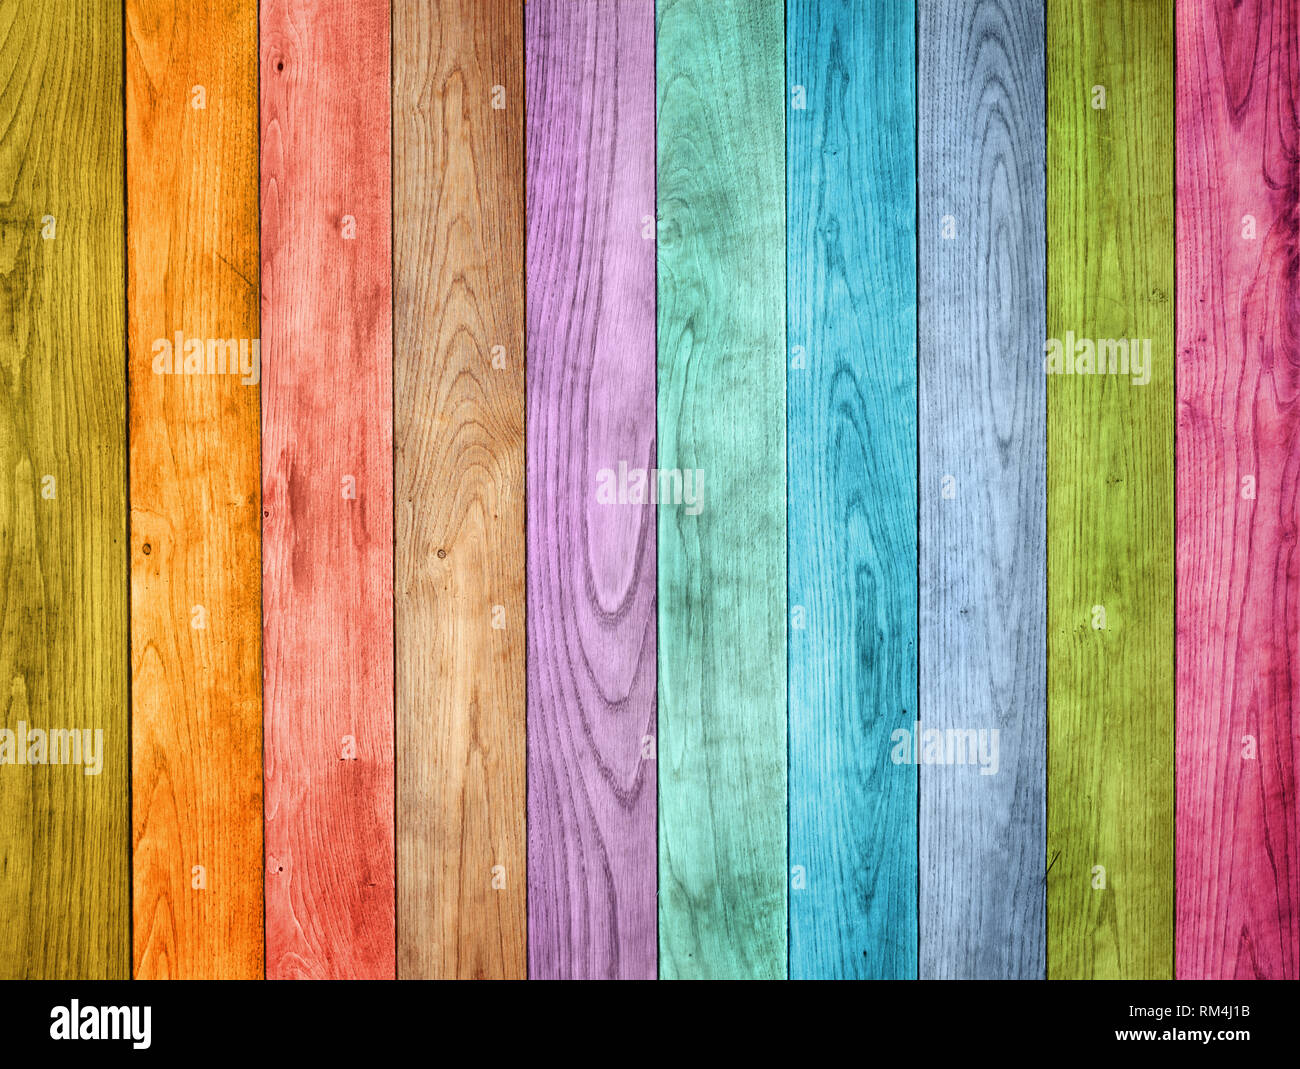 colored wood background Stock Photo